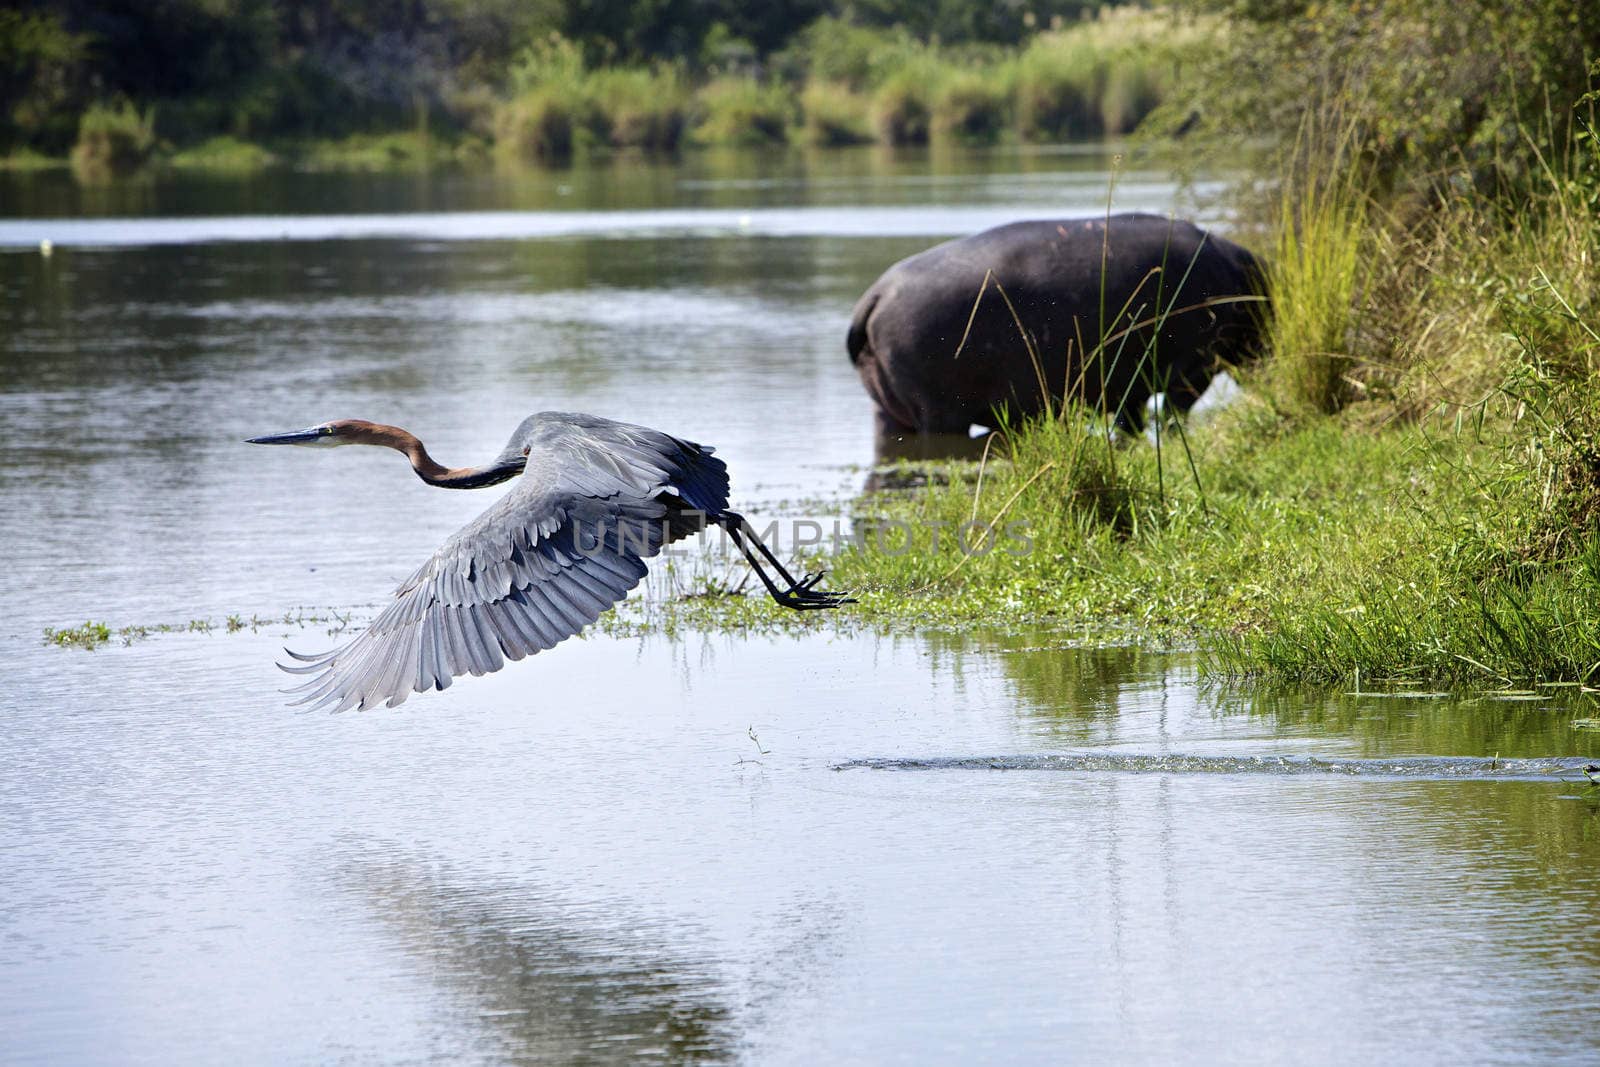 Goliath heron flying over the Lake Panic in the Kruger National Park, South Africa